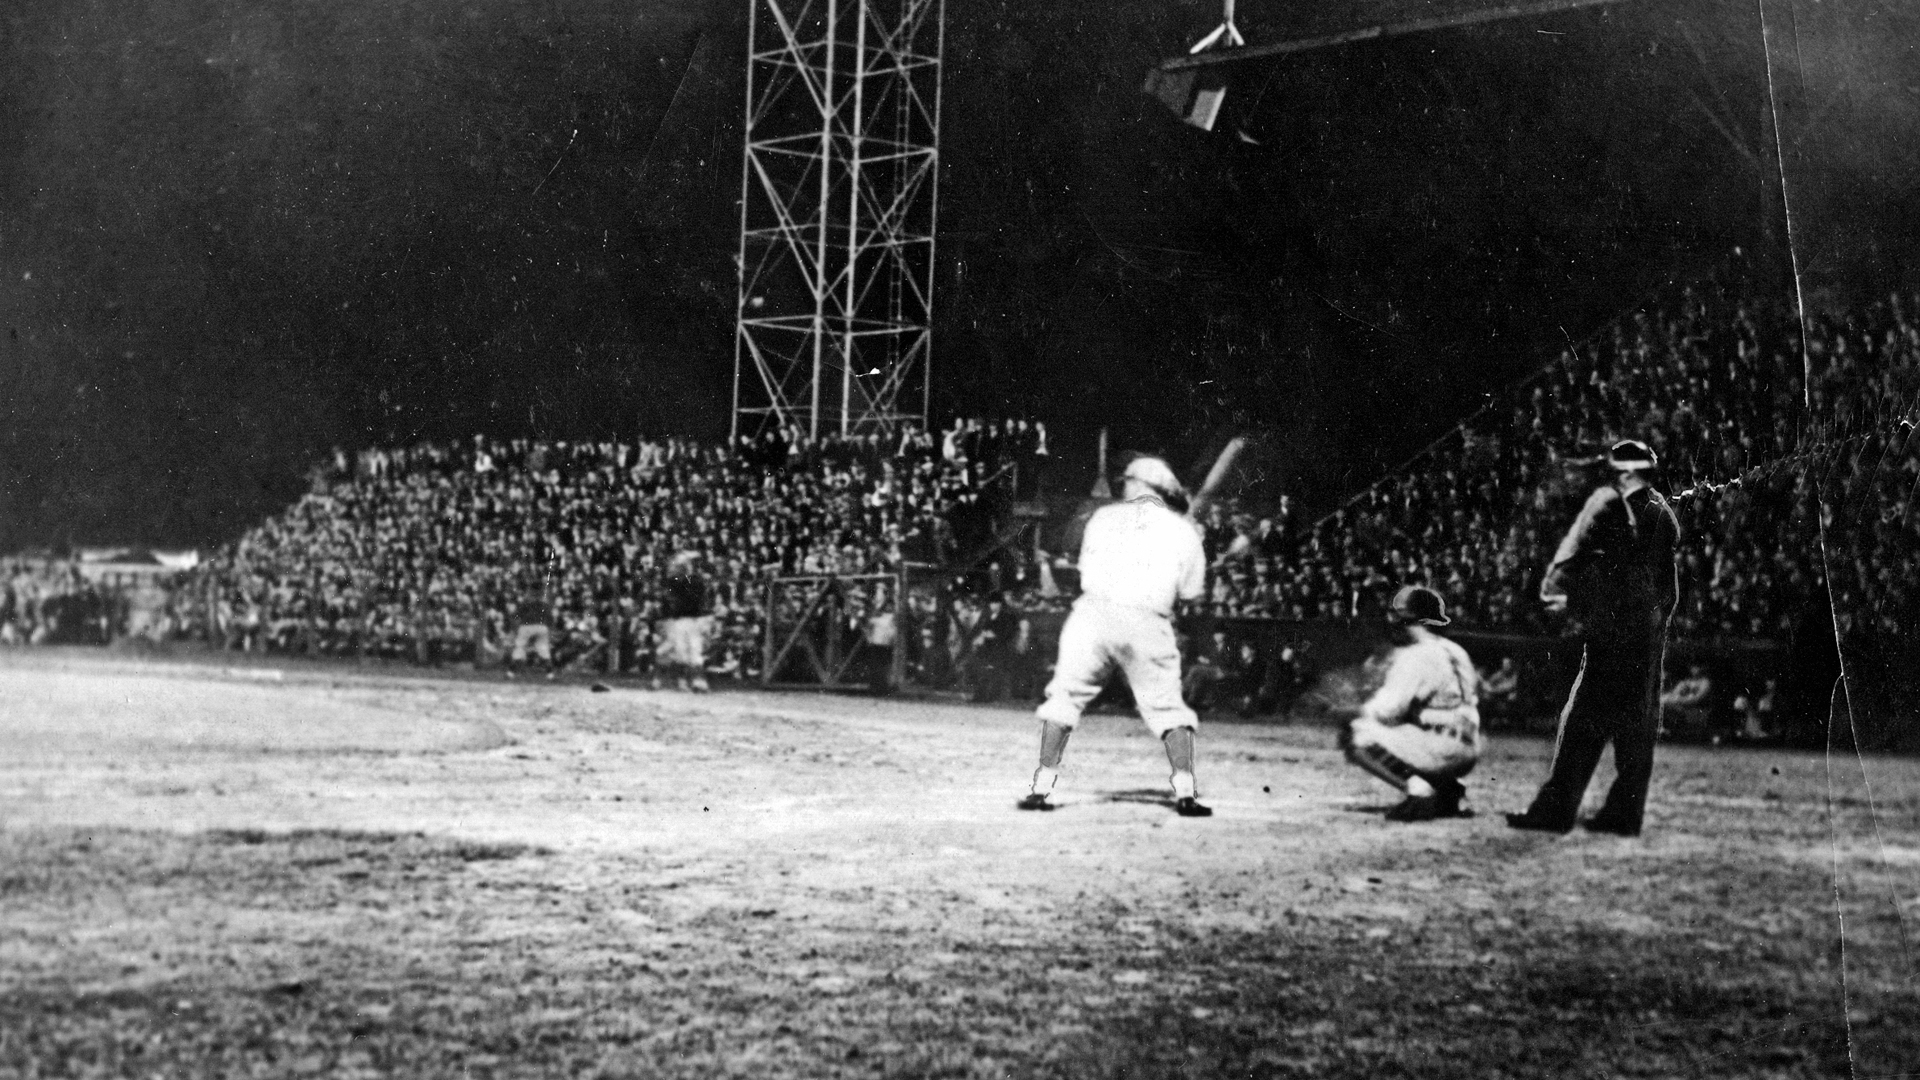 Multiple cities claim to have hosted the first night game in baseball